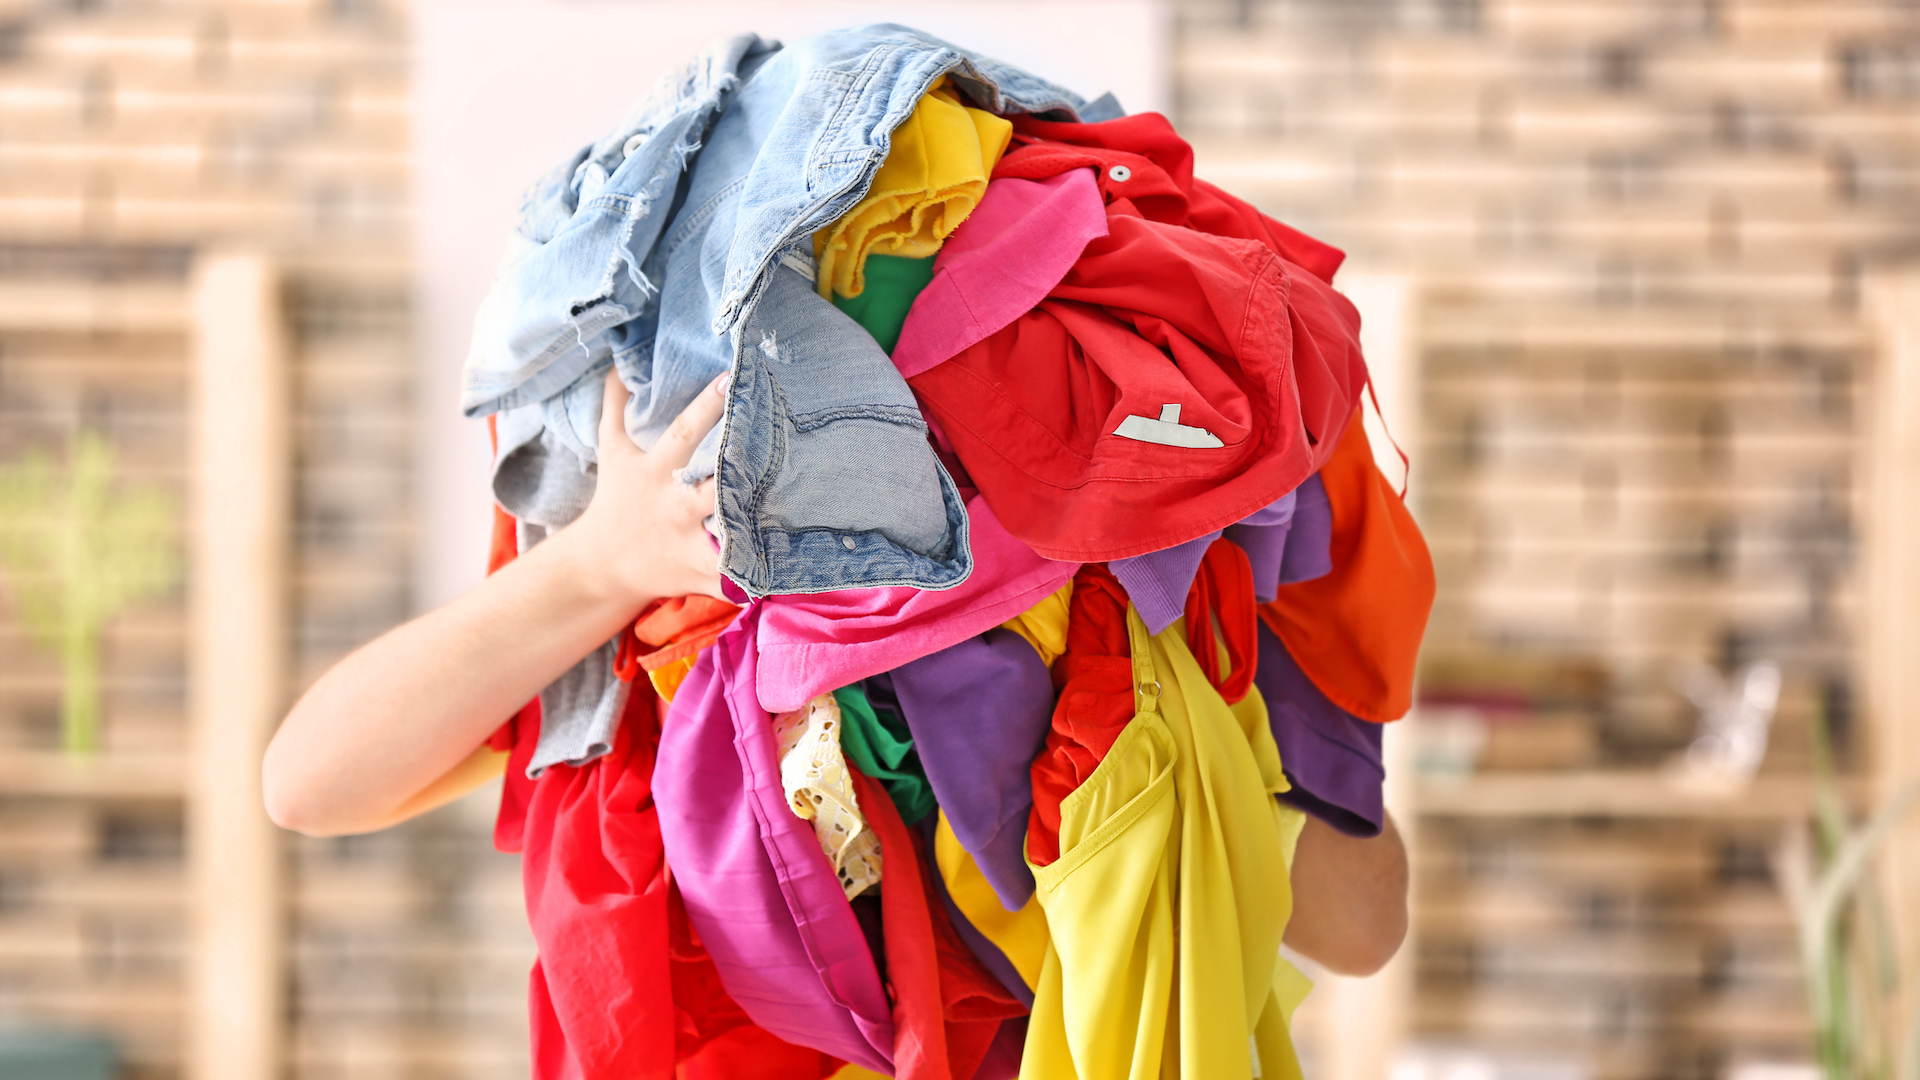 A person holding a pile of clothes